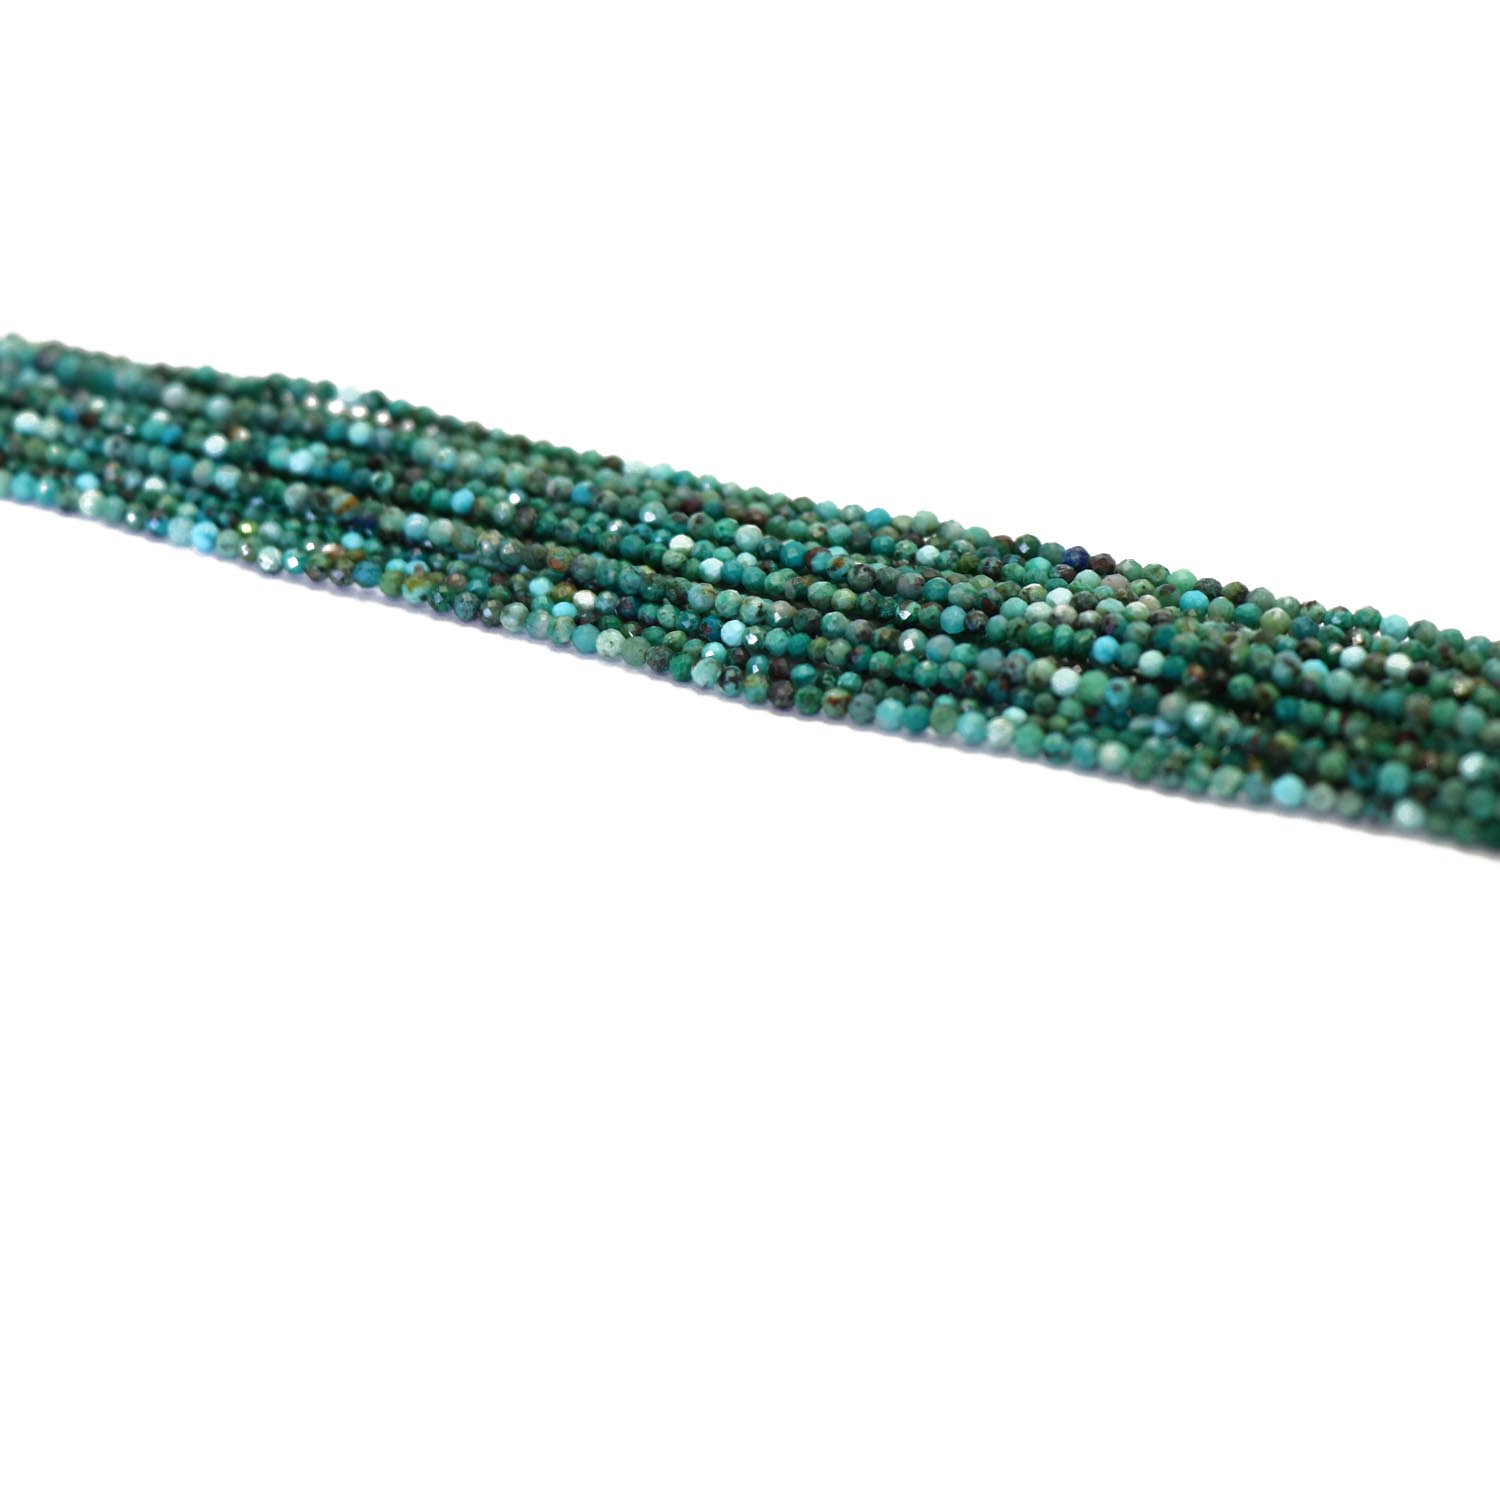 15 Strand Crysocolla Faceted Round Beads 2mm.